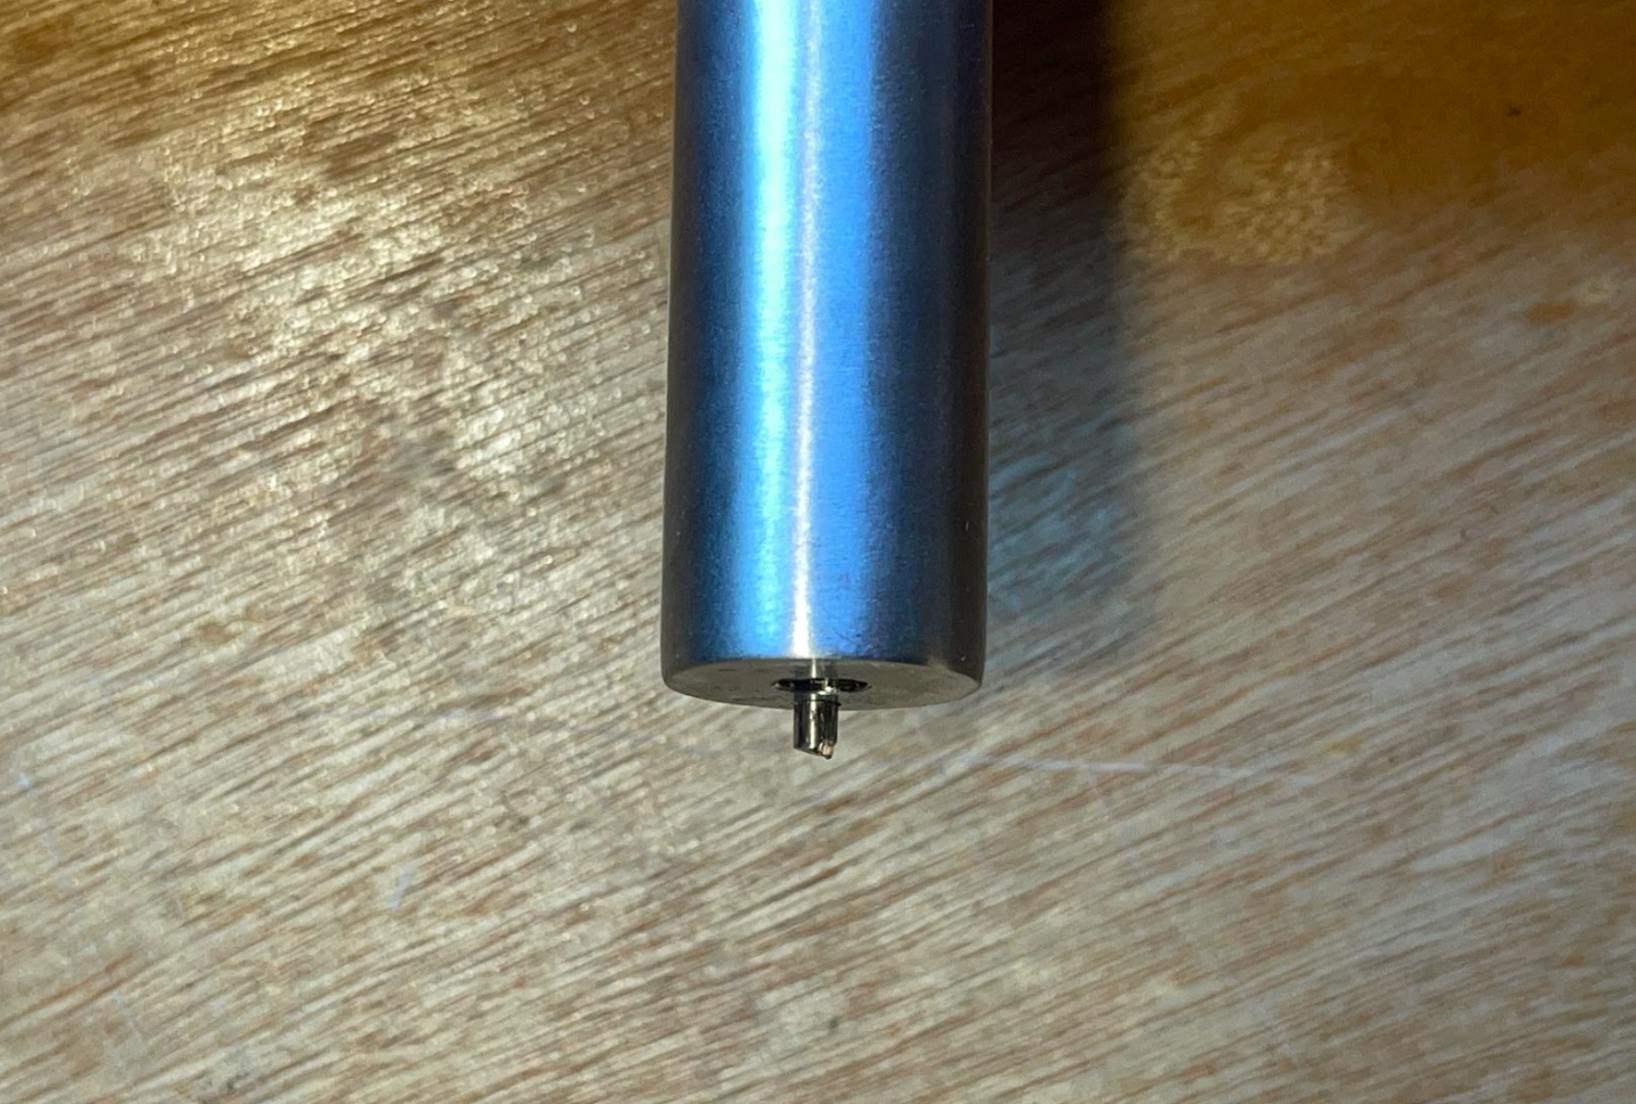 The mounting nib on the Mercer Magnetic Knife Board.